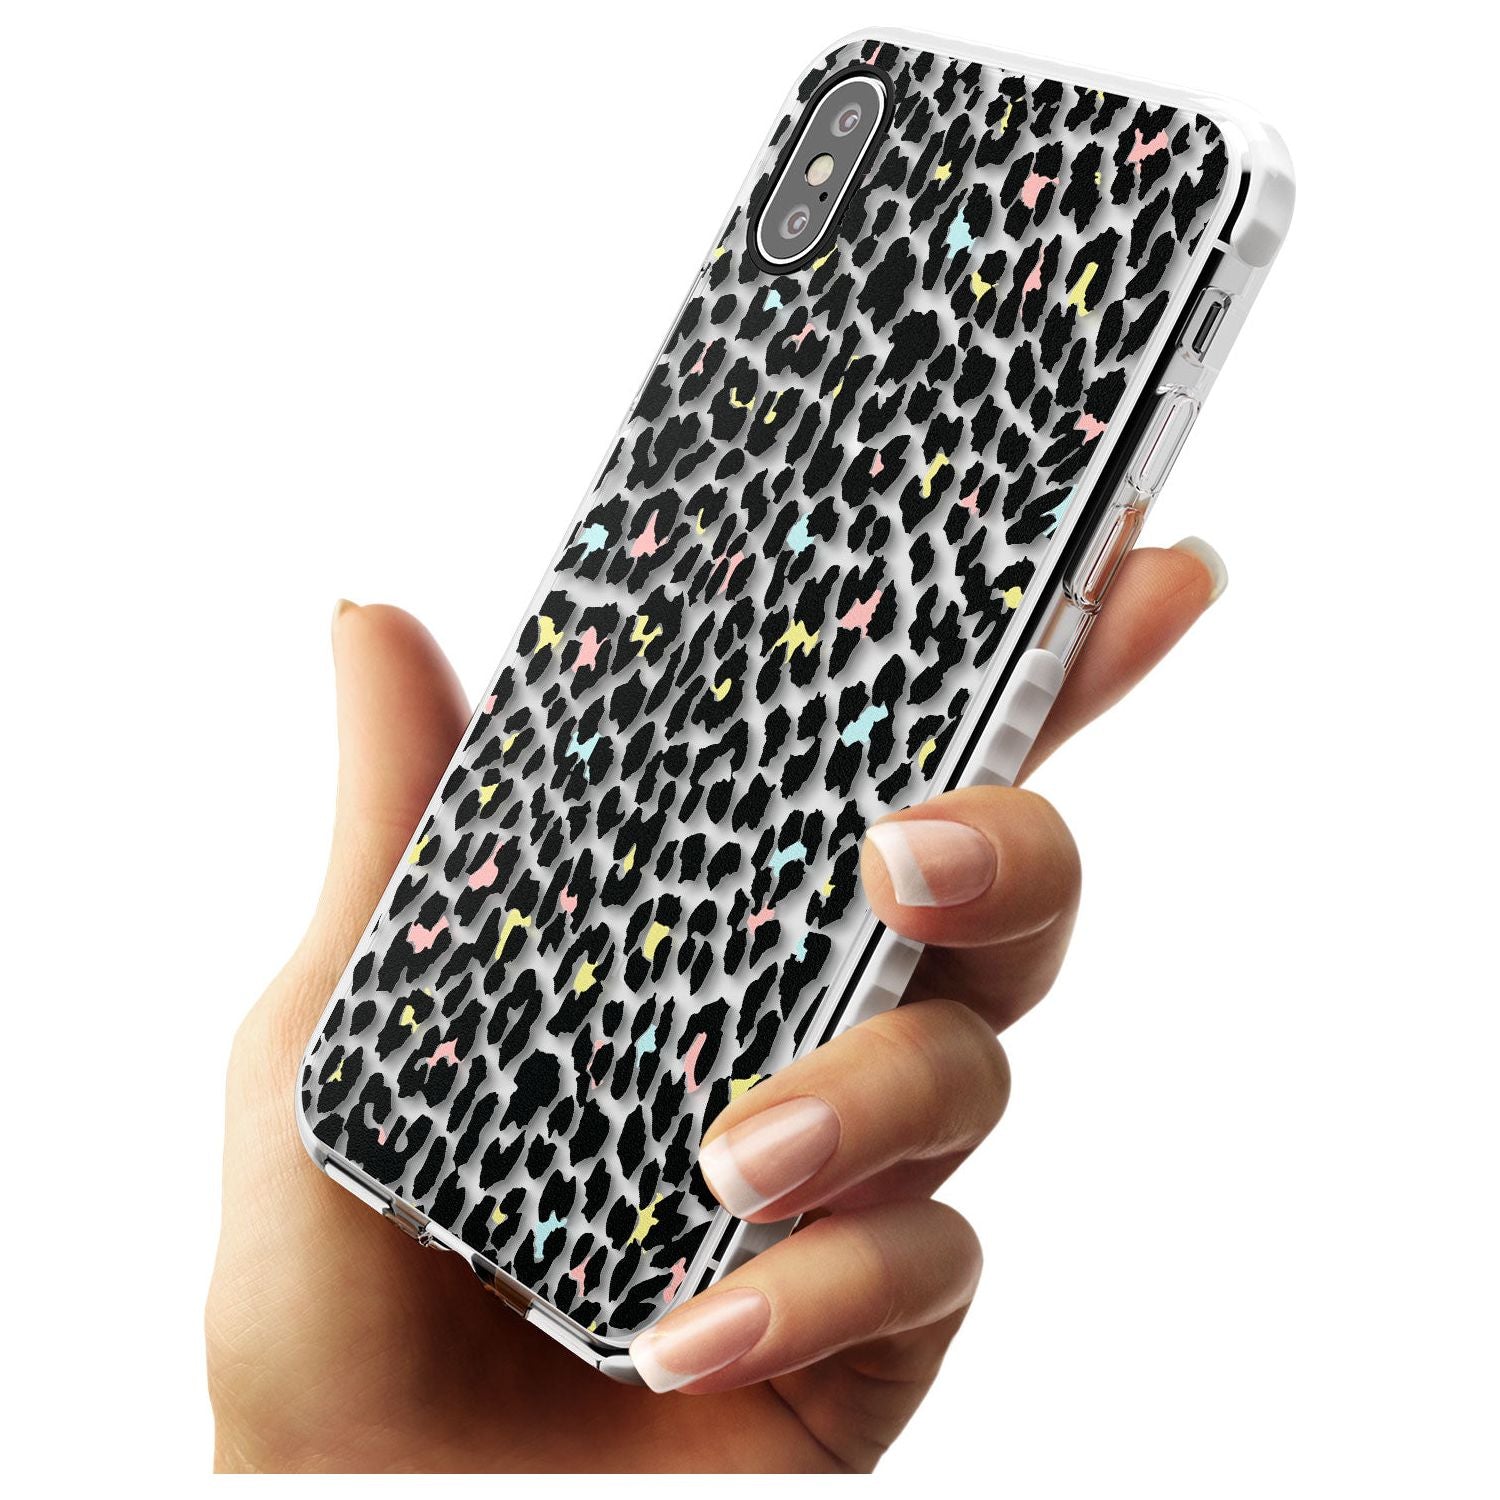 Mixed Pastels Leopard Print - Transparent Impact Phone Case for iPhone X XS Max XR